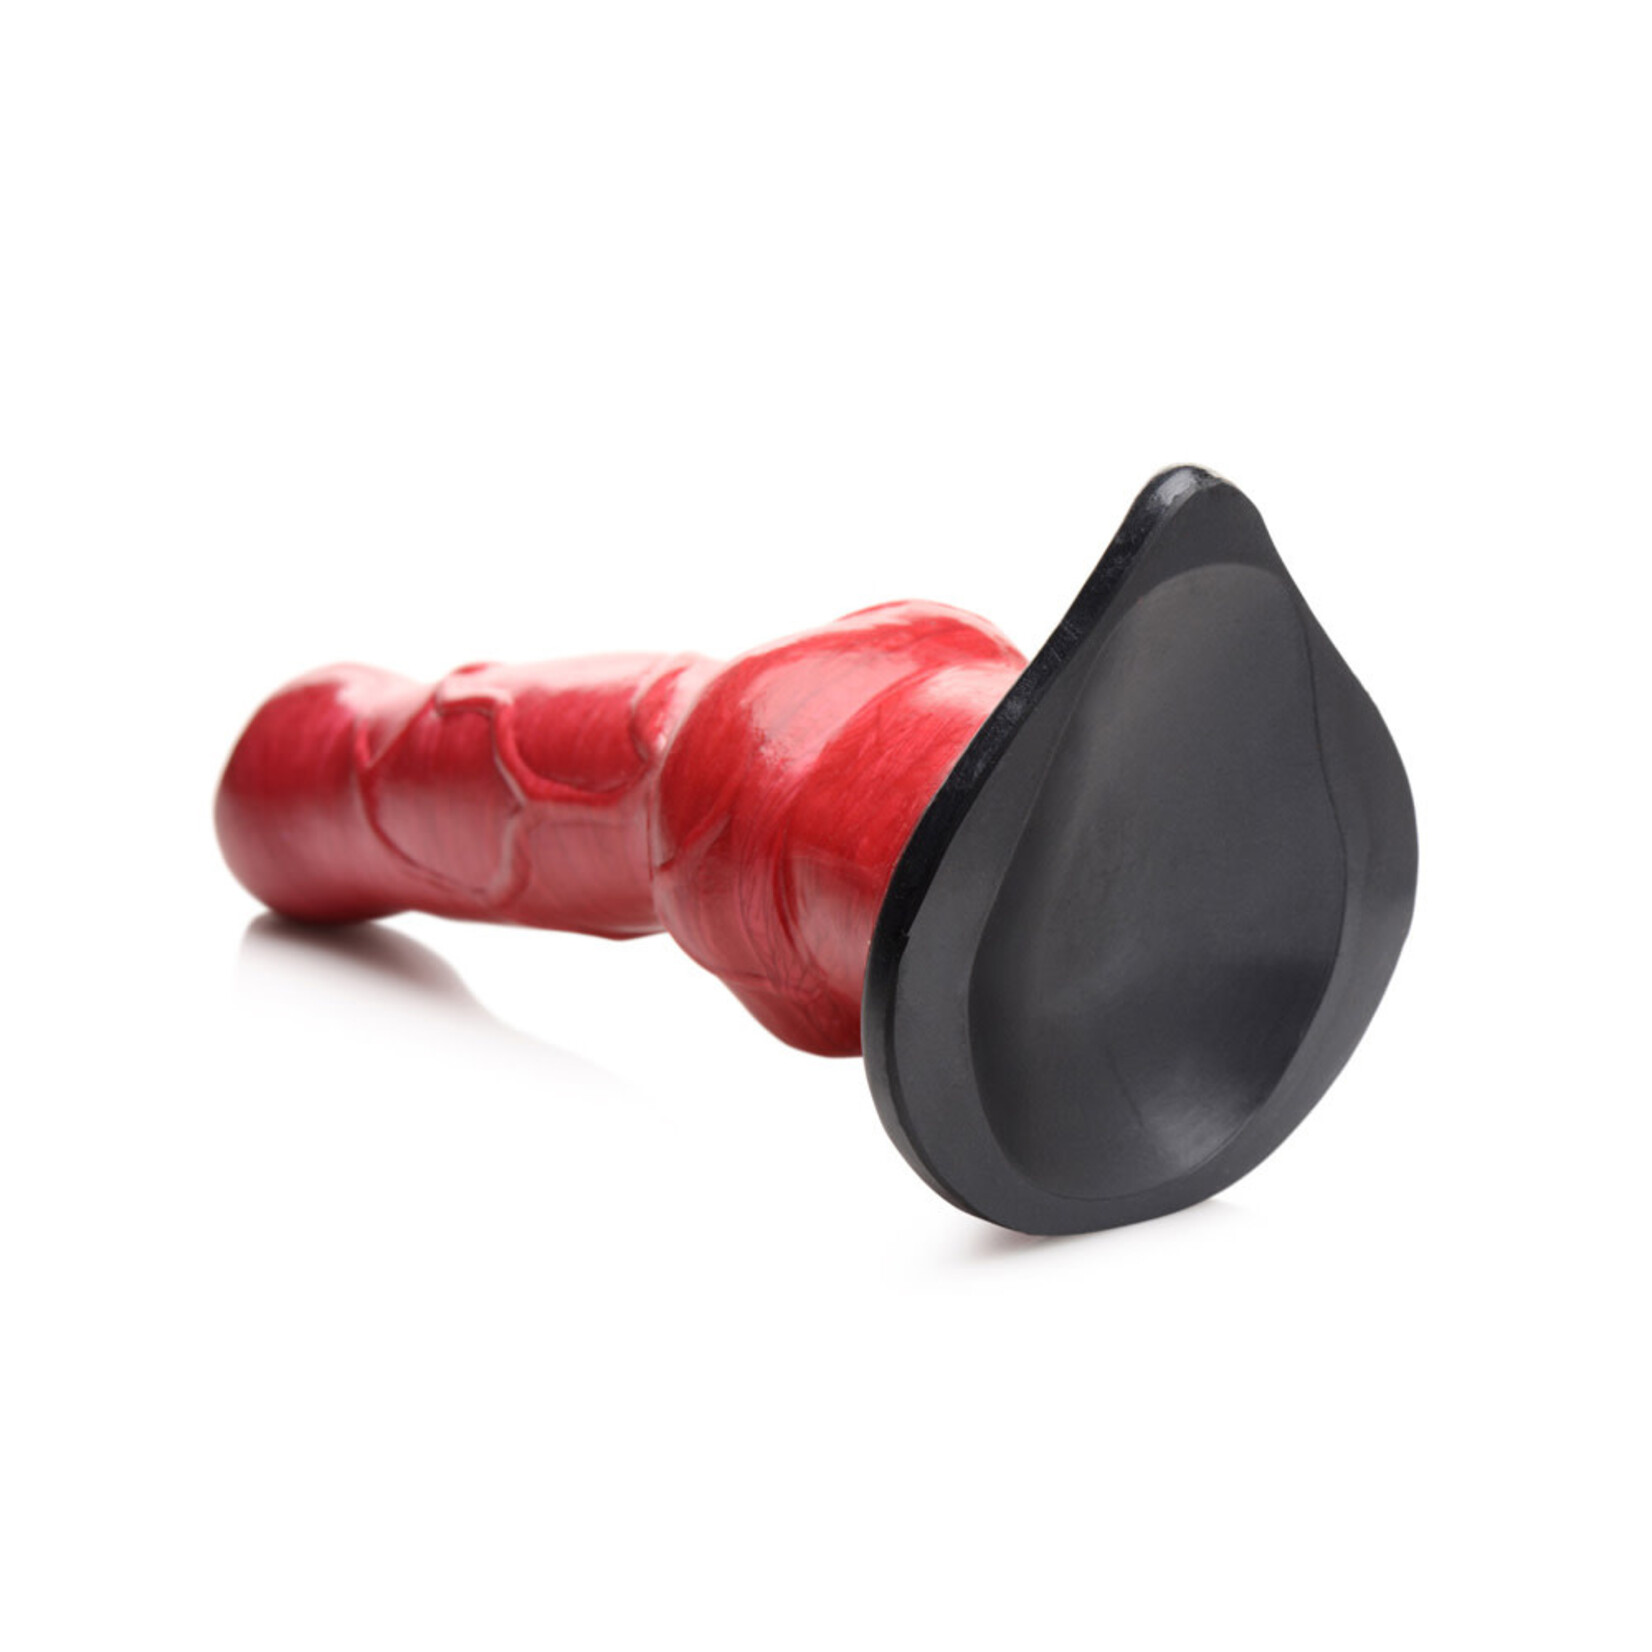 CREATURE COCKS CREATURE COCKS - HELL-HOUND CANINE PENIS SILICONE DILDO